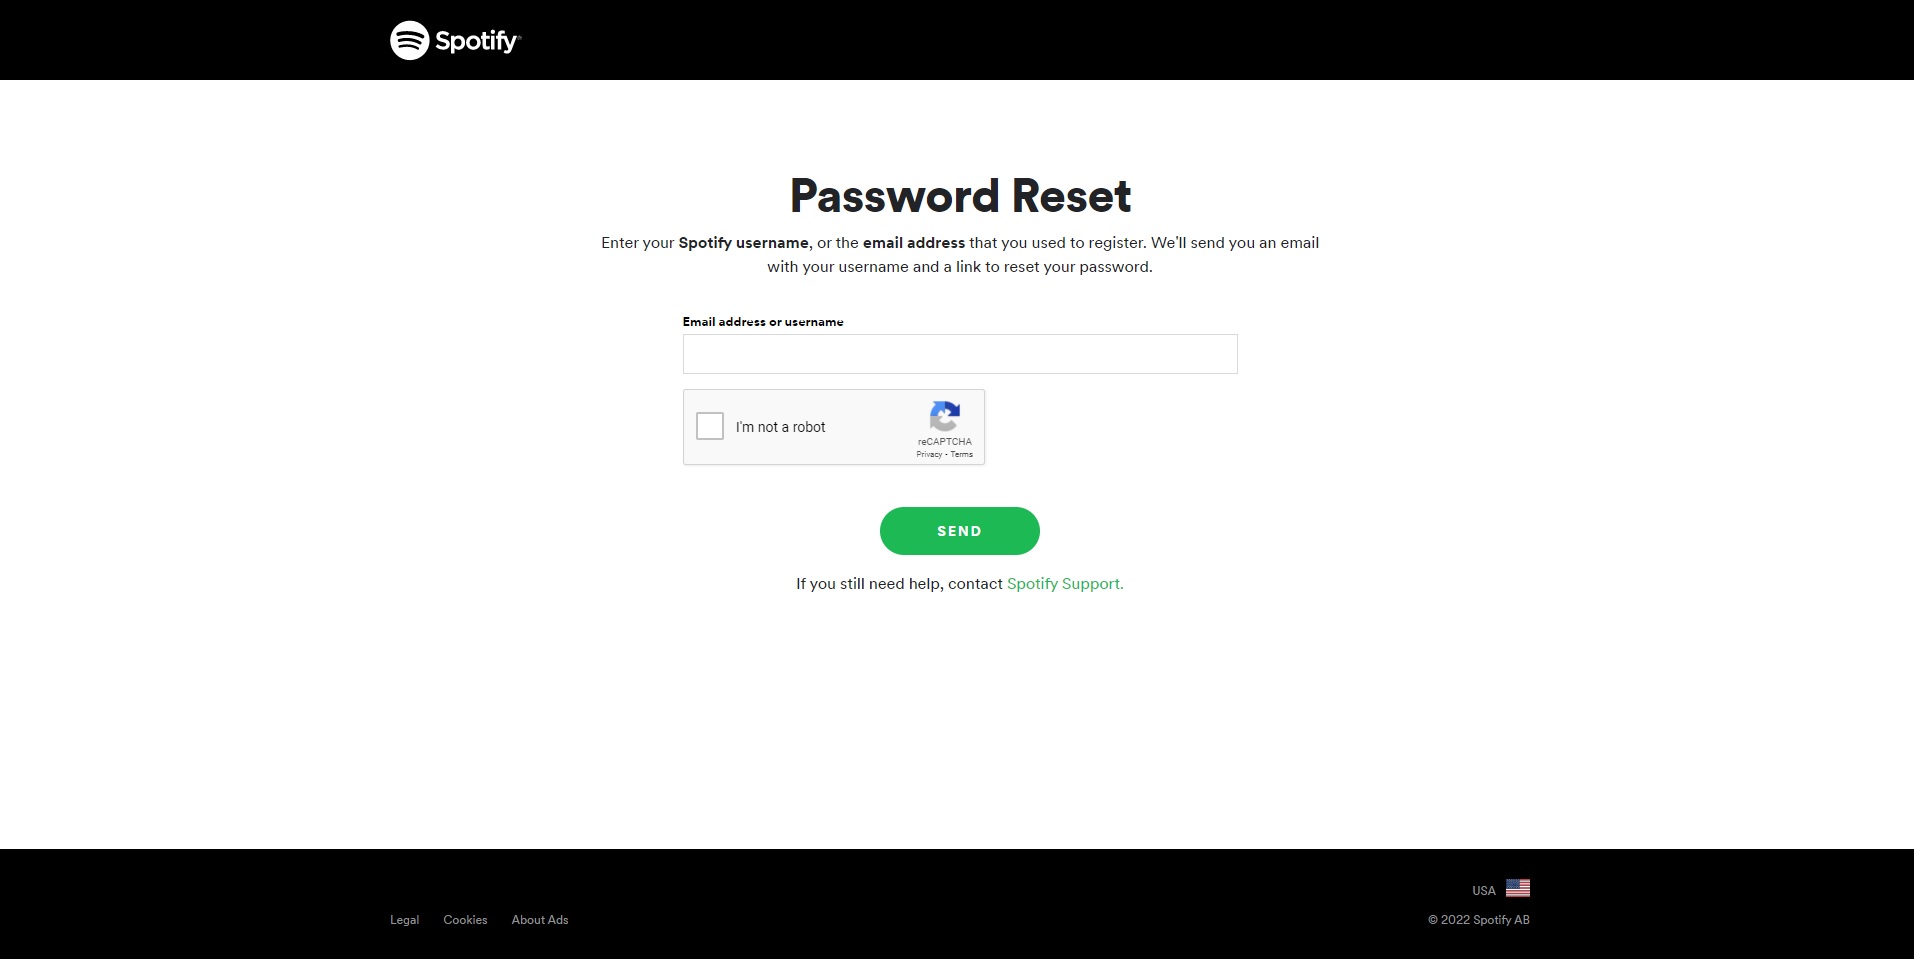 How to reset Spotify password